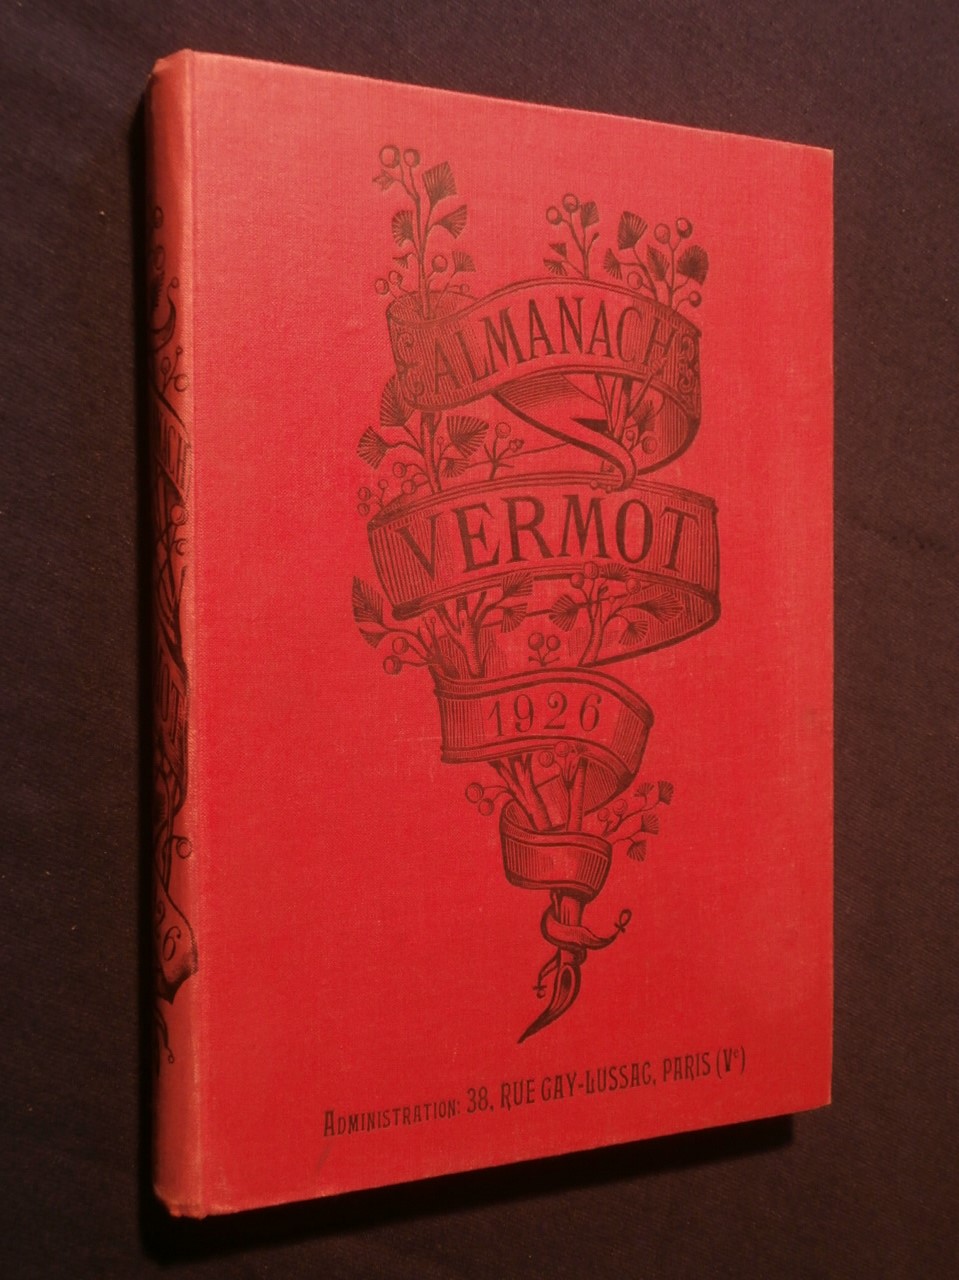 Coverage of the forty-first year of the Almanach Vermot 1926 News